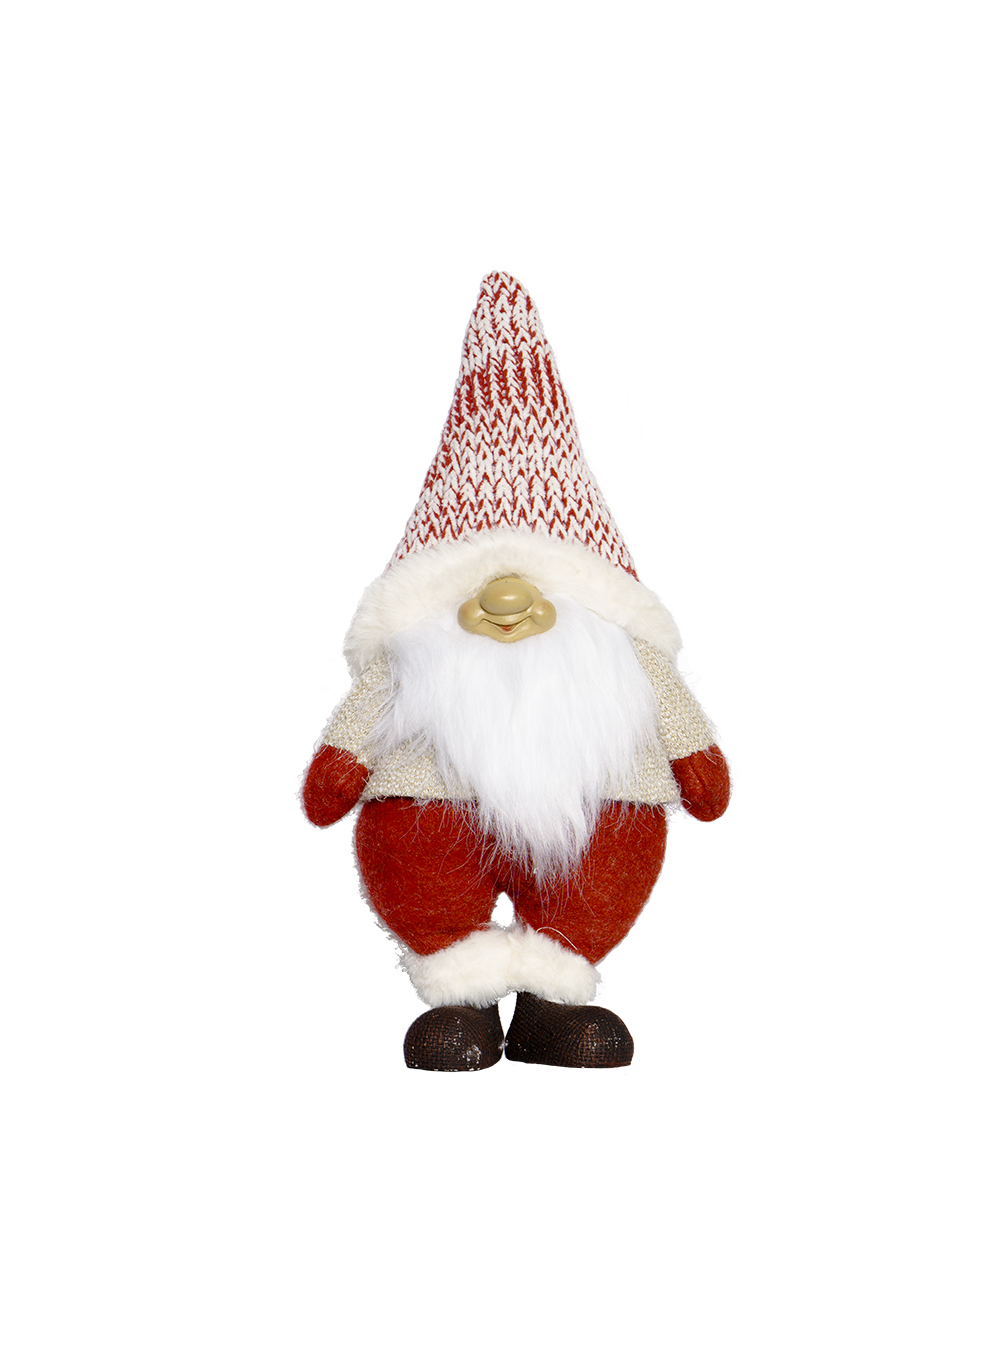 Standing Santa with Knitted Hat (Pollyanna)